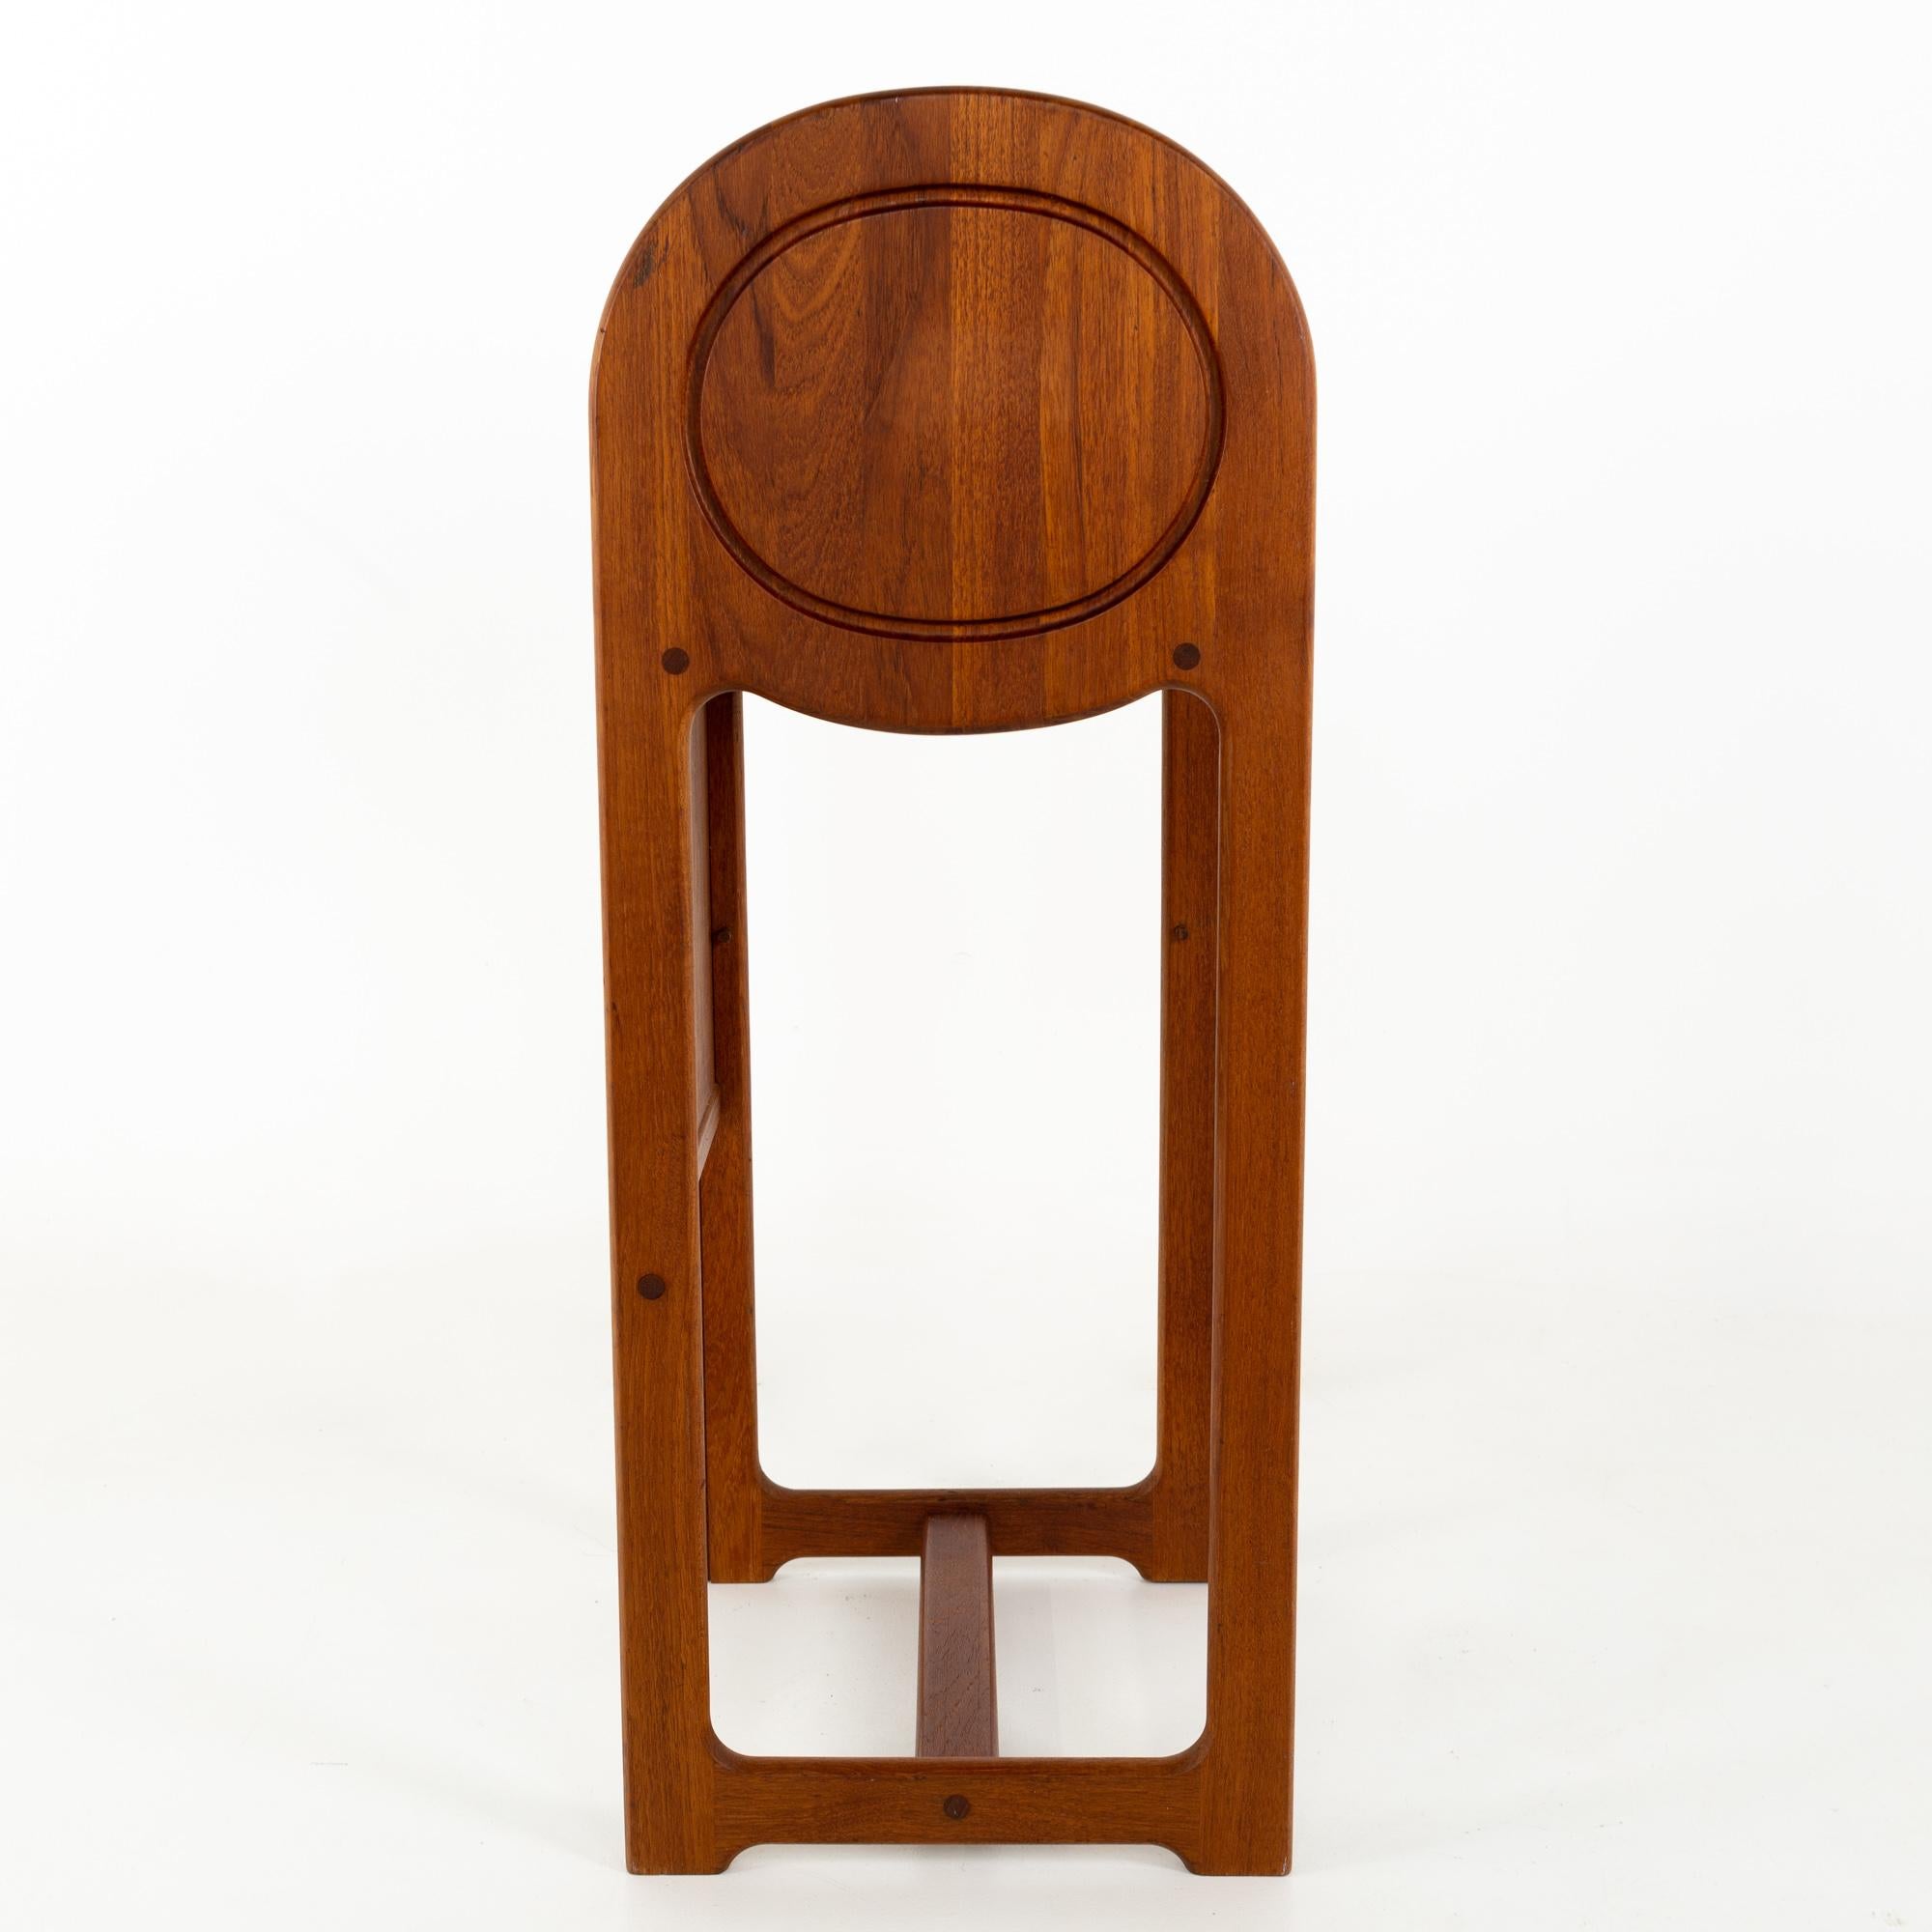 Mid Century Danish Teak Tambour Door Foyer Entry Console Phone Table
This table is 16.5 wide x 14 deep x 36 inches high, with a chair clearance of 24.75 inches

All pieces of furniture can be had in what we call restored vintage condition. That